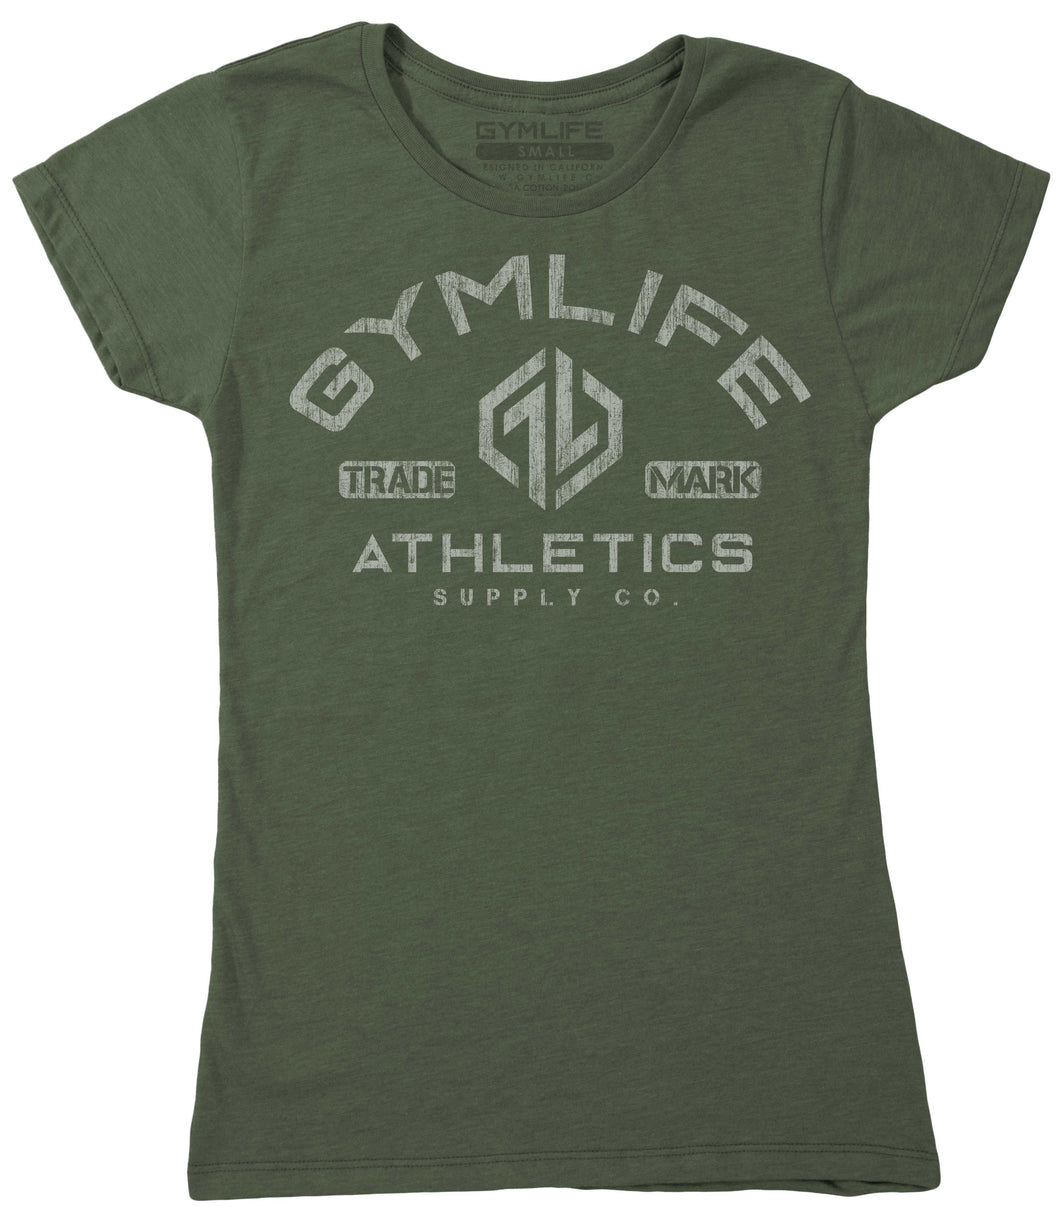 Gym Life® Womens - Supply Co. - 52/48 T-Shirt - Olive